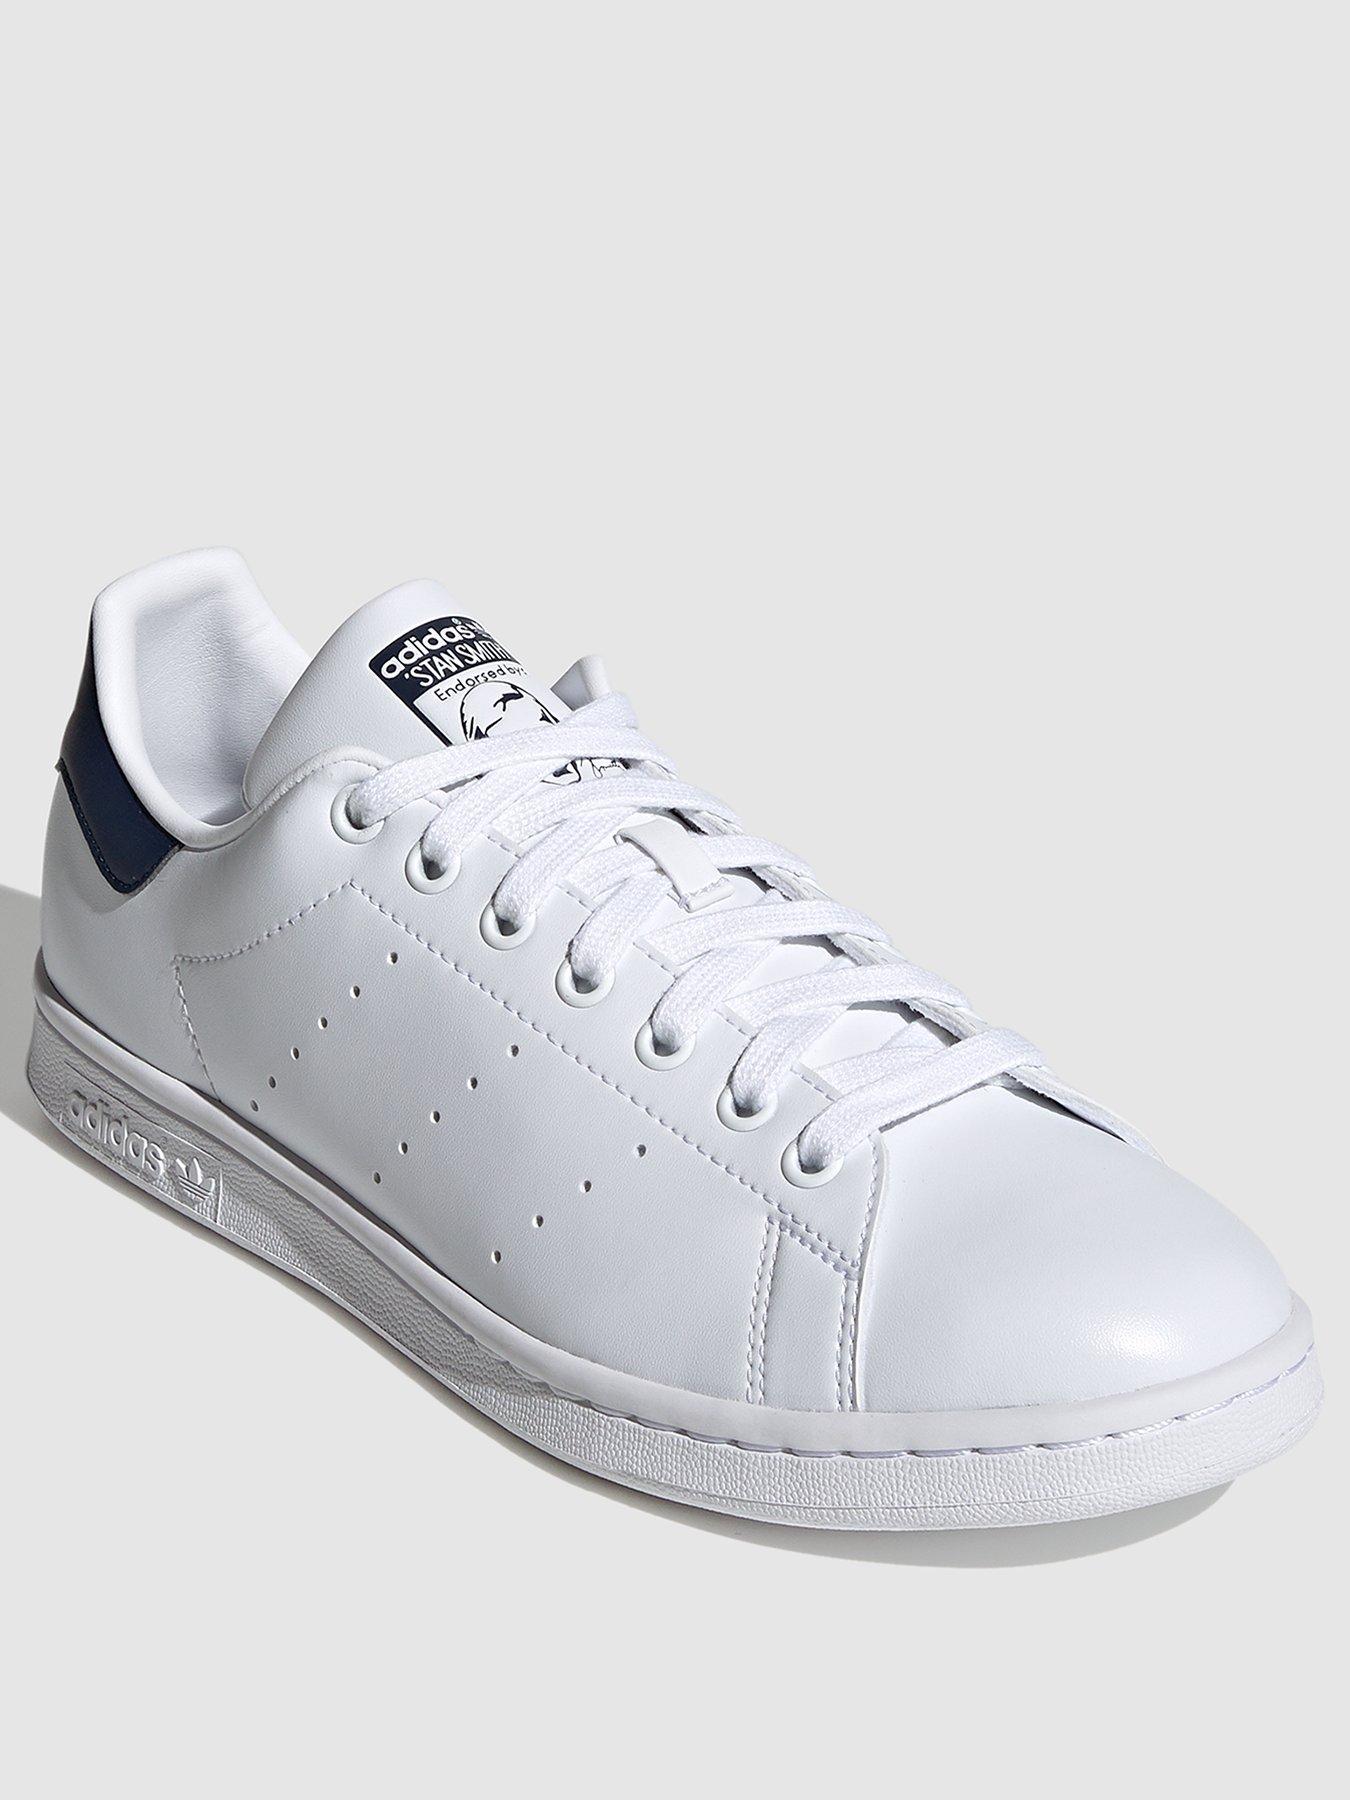 17 Stan smith ideas  mens outfits, mens casual outfits, men casual